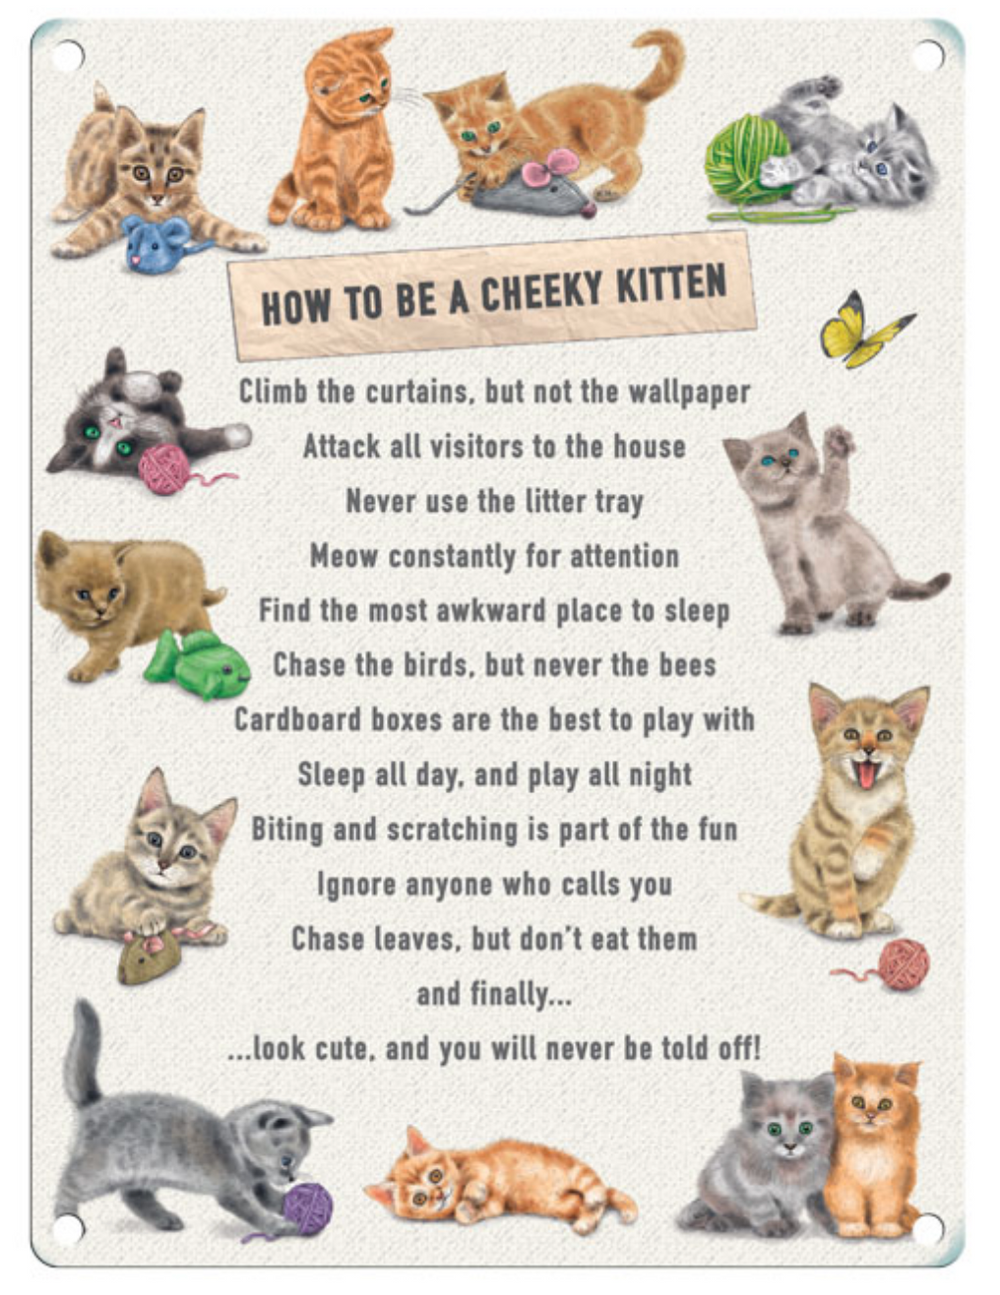 How to be a Cheeky Kitten Metal Hanging Cat Sign